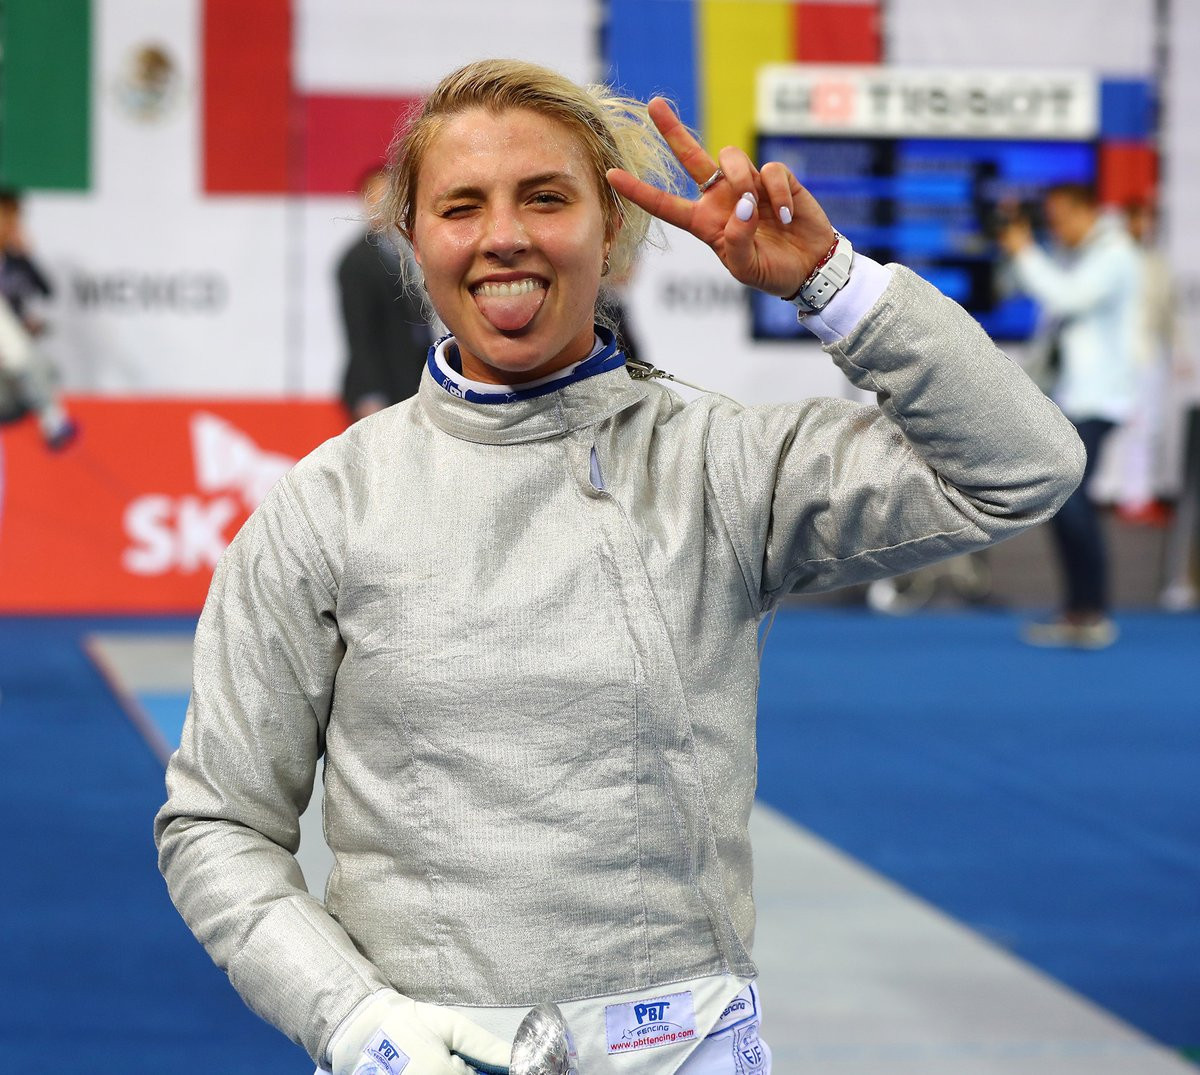 Ukraine's Olha Kharlan, the Olympic gold medallist at Beijing 2008, won the women's sabre event at the FIE Grand Prix in Seoul, beating Hungary's Anna Márton in the final ©FIE